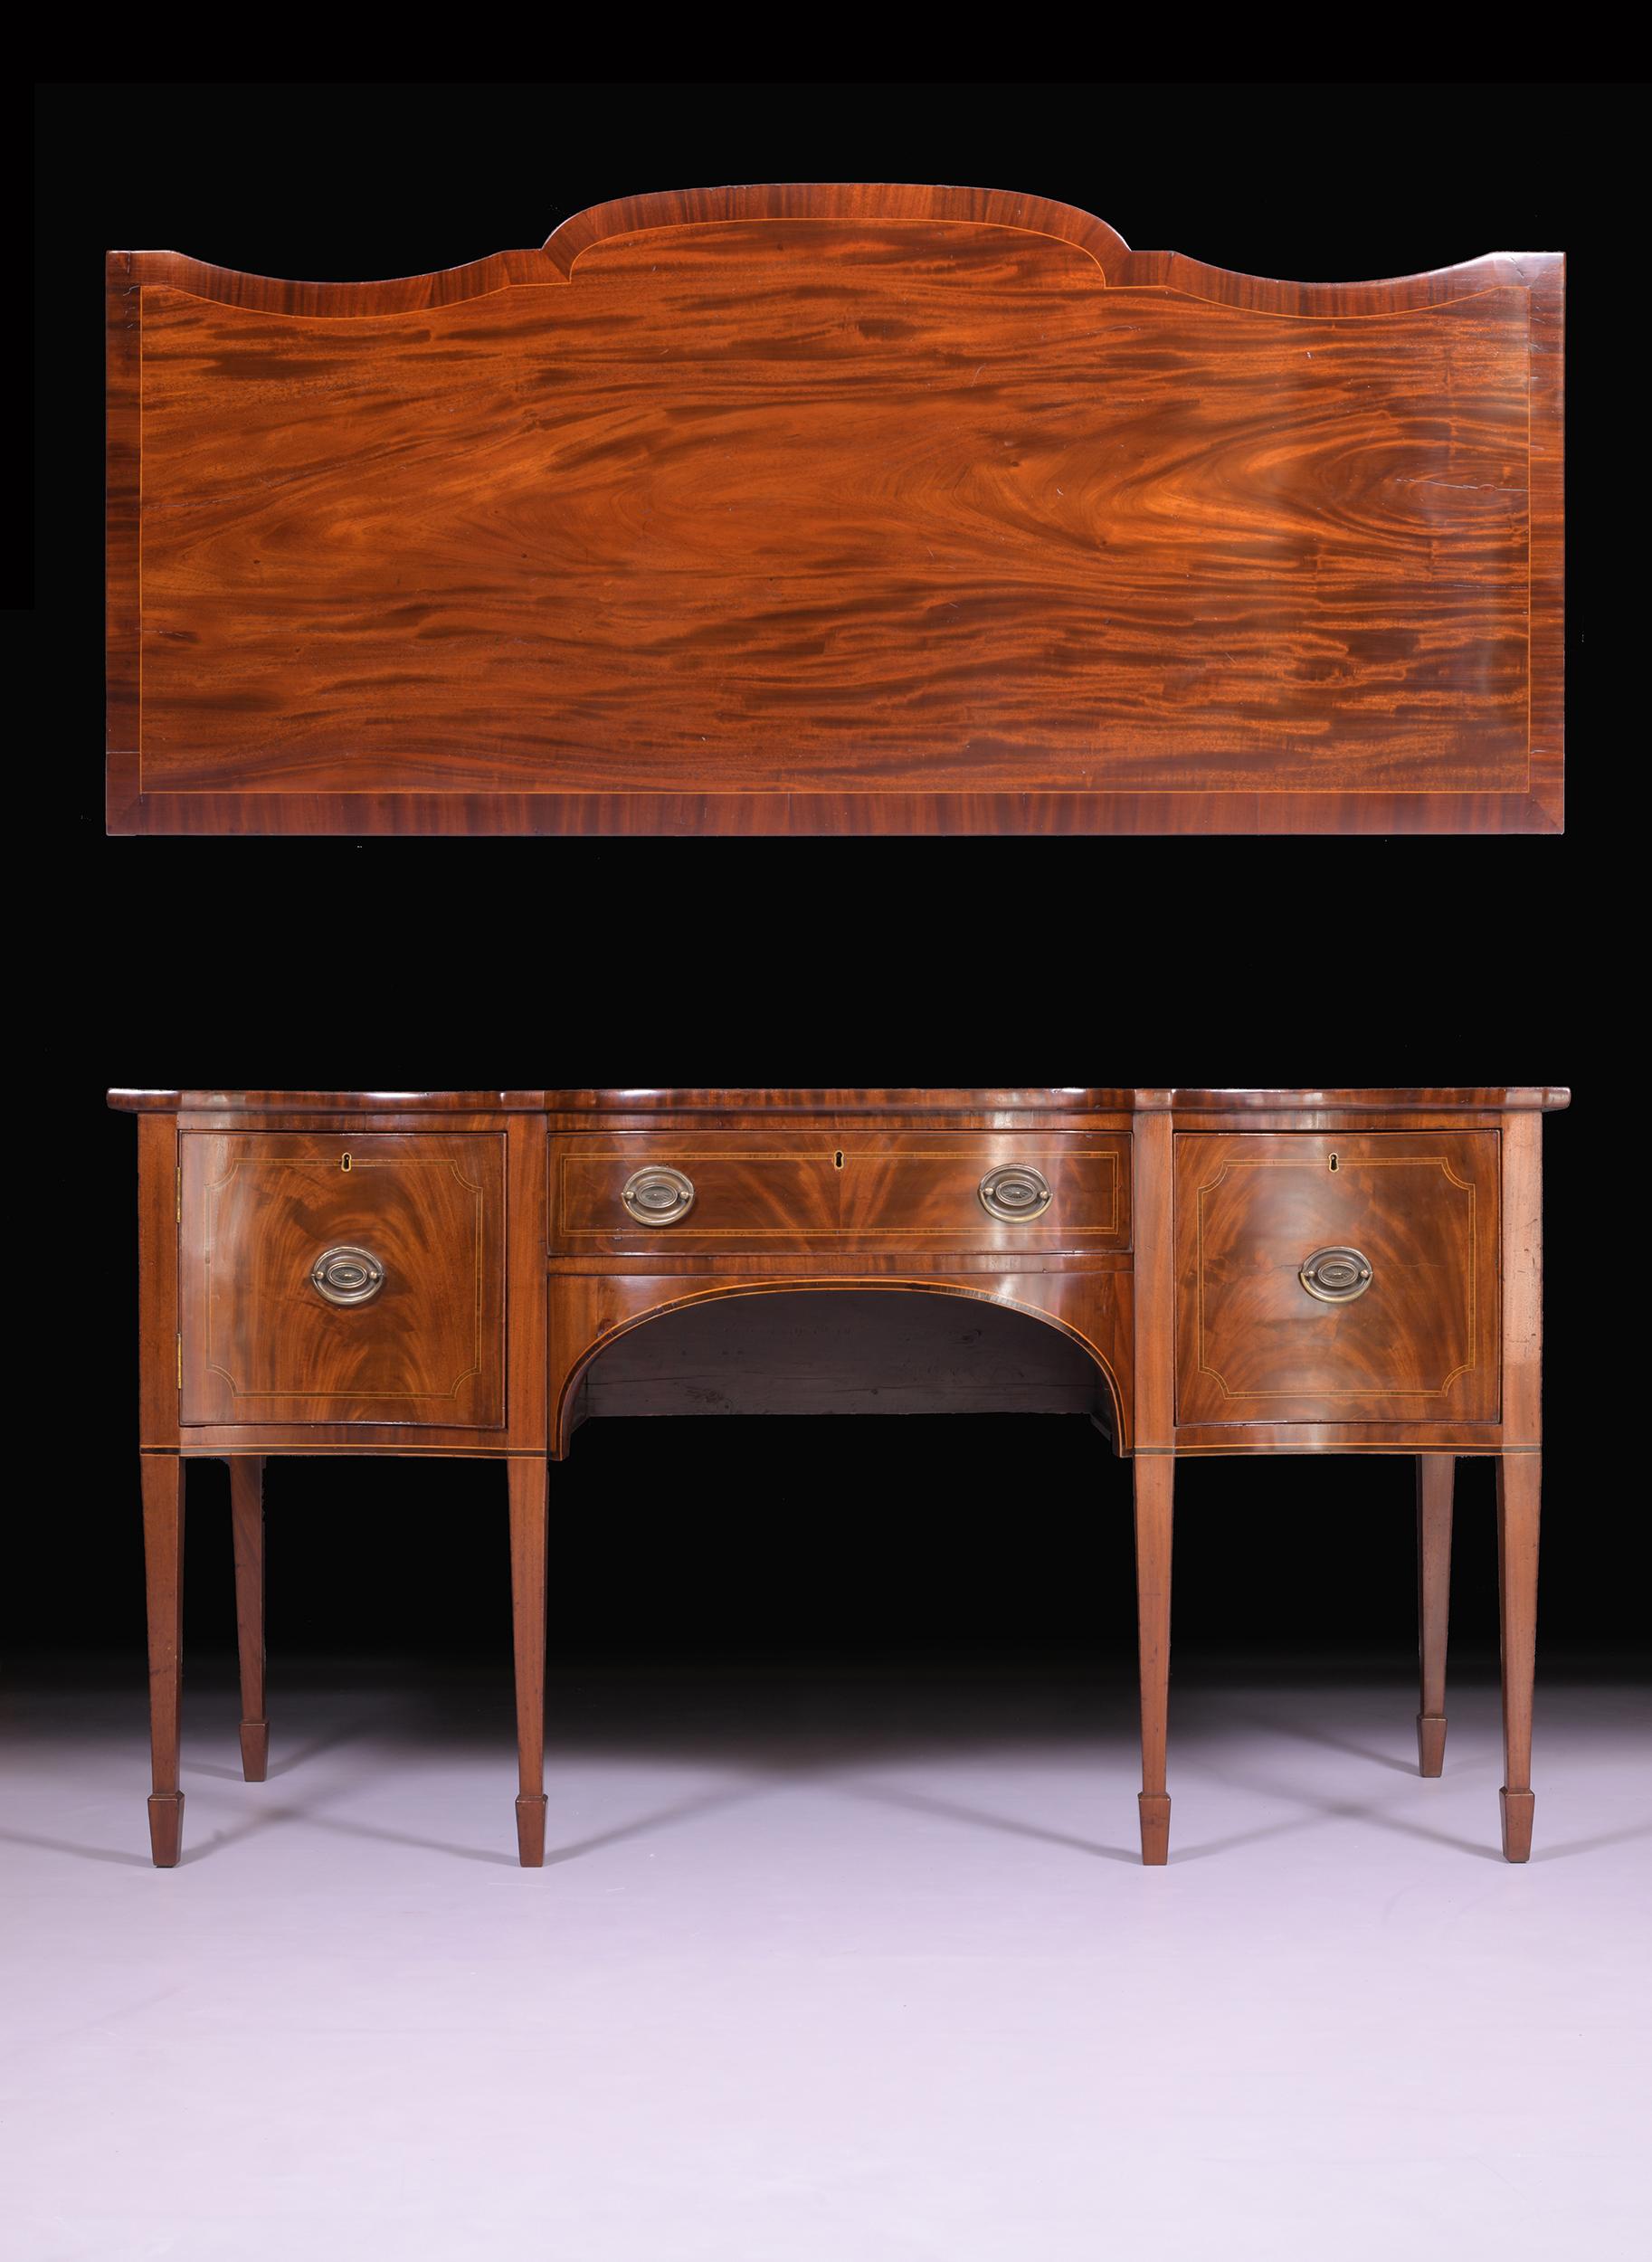 A fine and elegant Georgian period Hepplewhite serpentine shaped sideboard. Having a beautiful figured top over three drawers, raised on square moulded legs.

Circa 1780

English